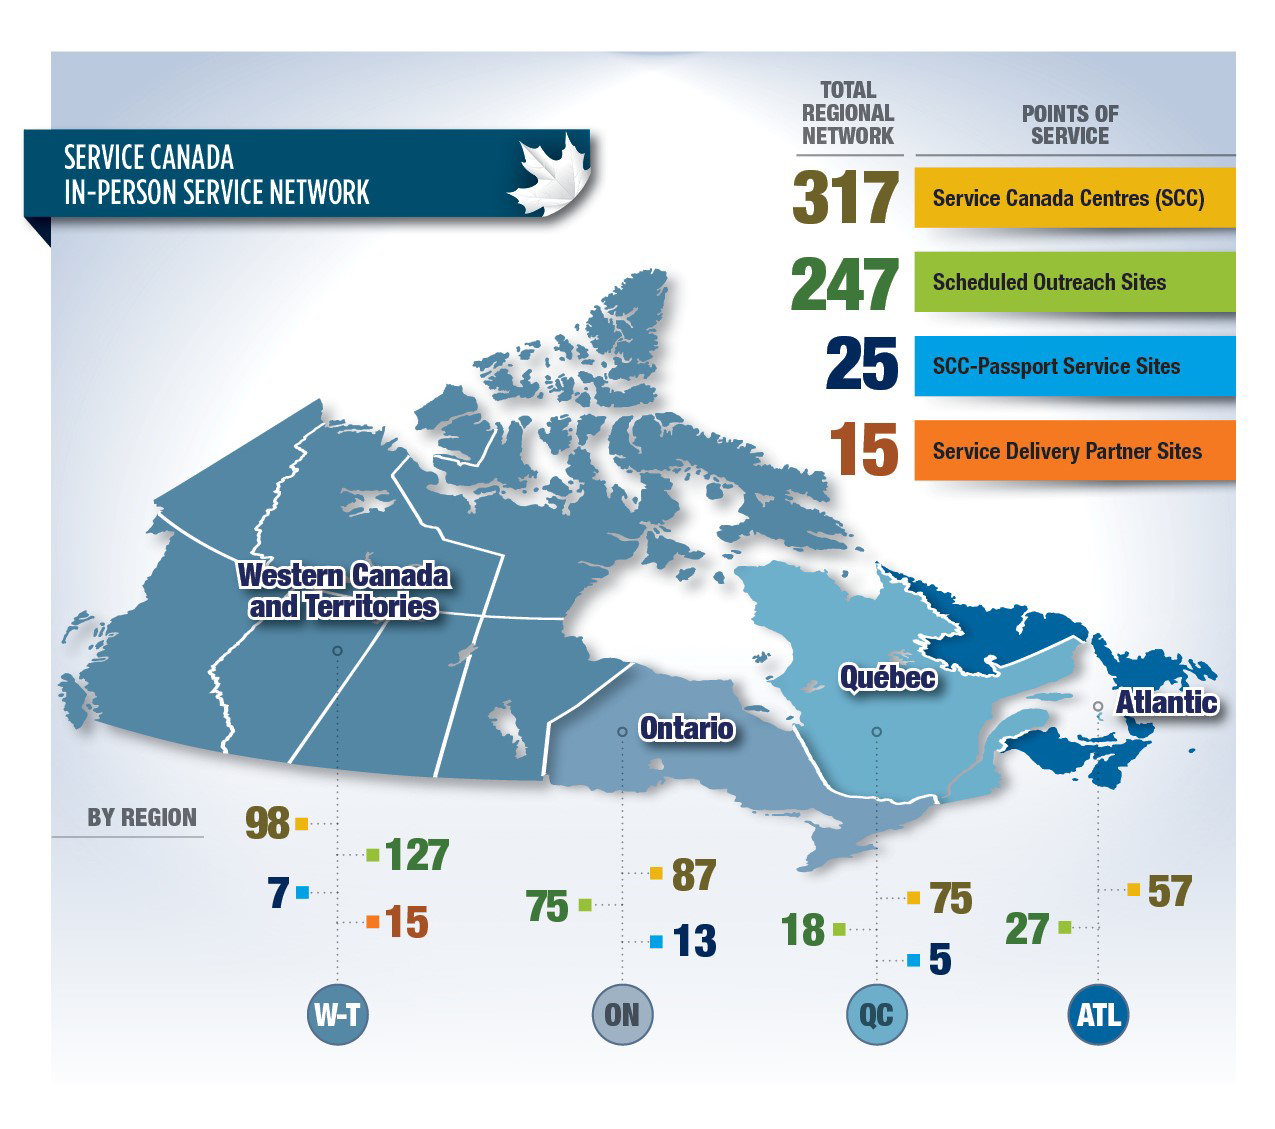 Figure 1: Service Canada in-person service  network, as of March 31, 2021